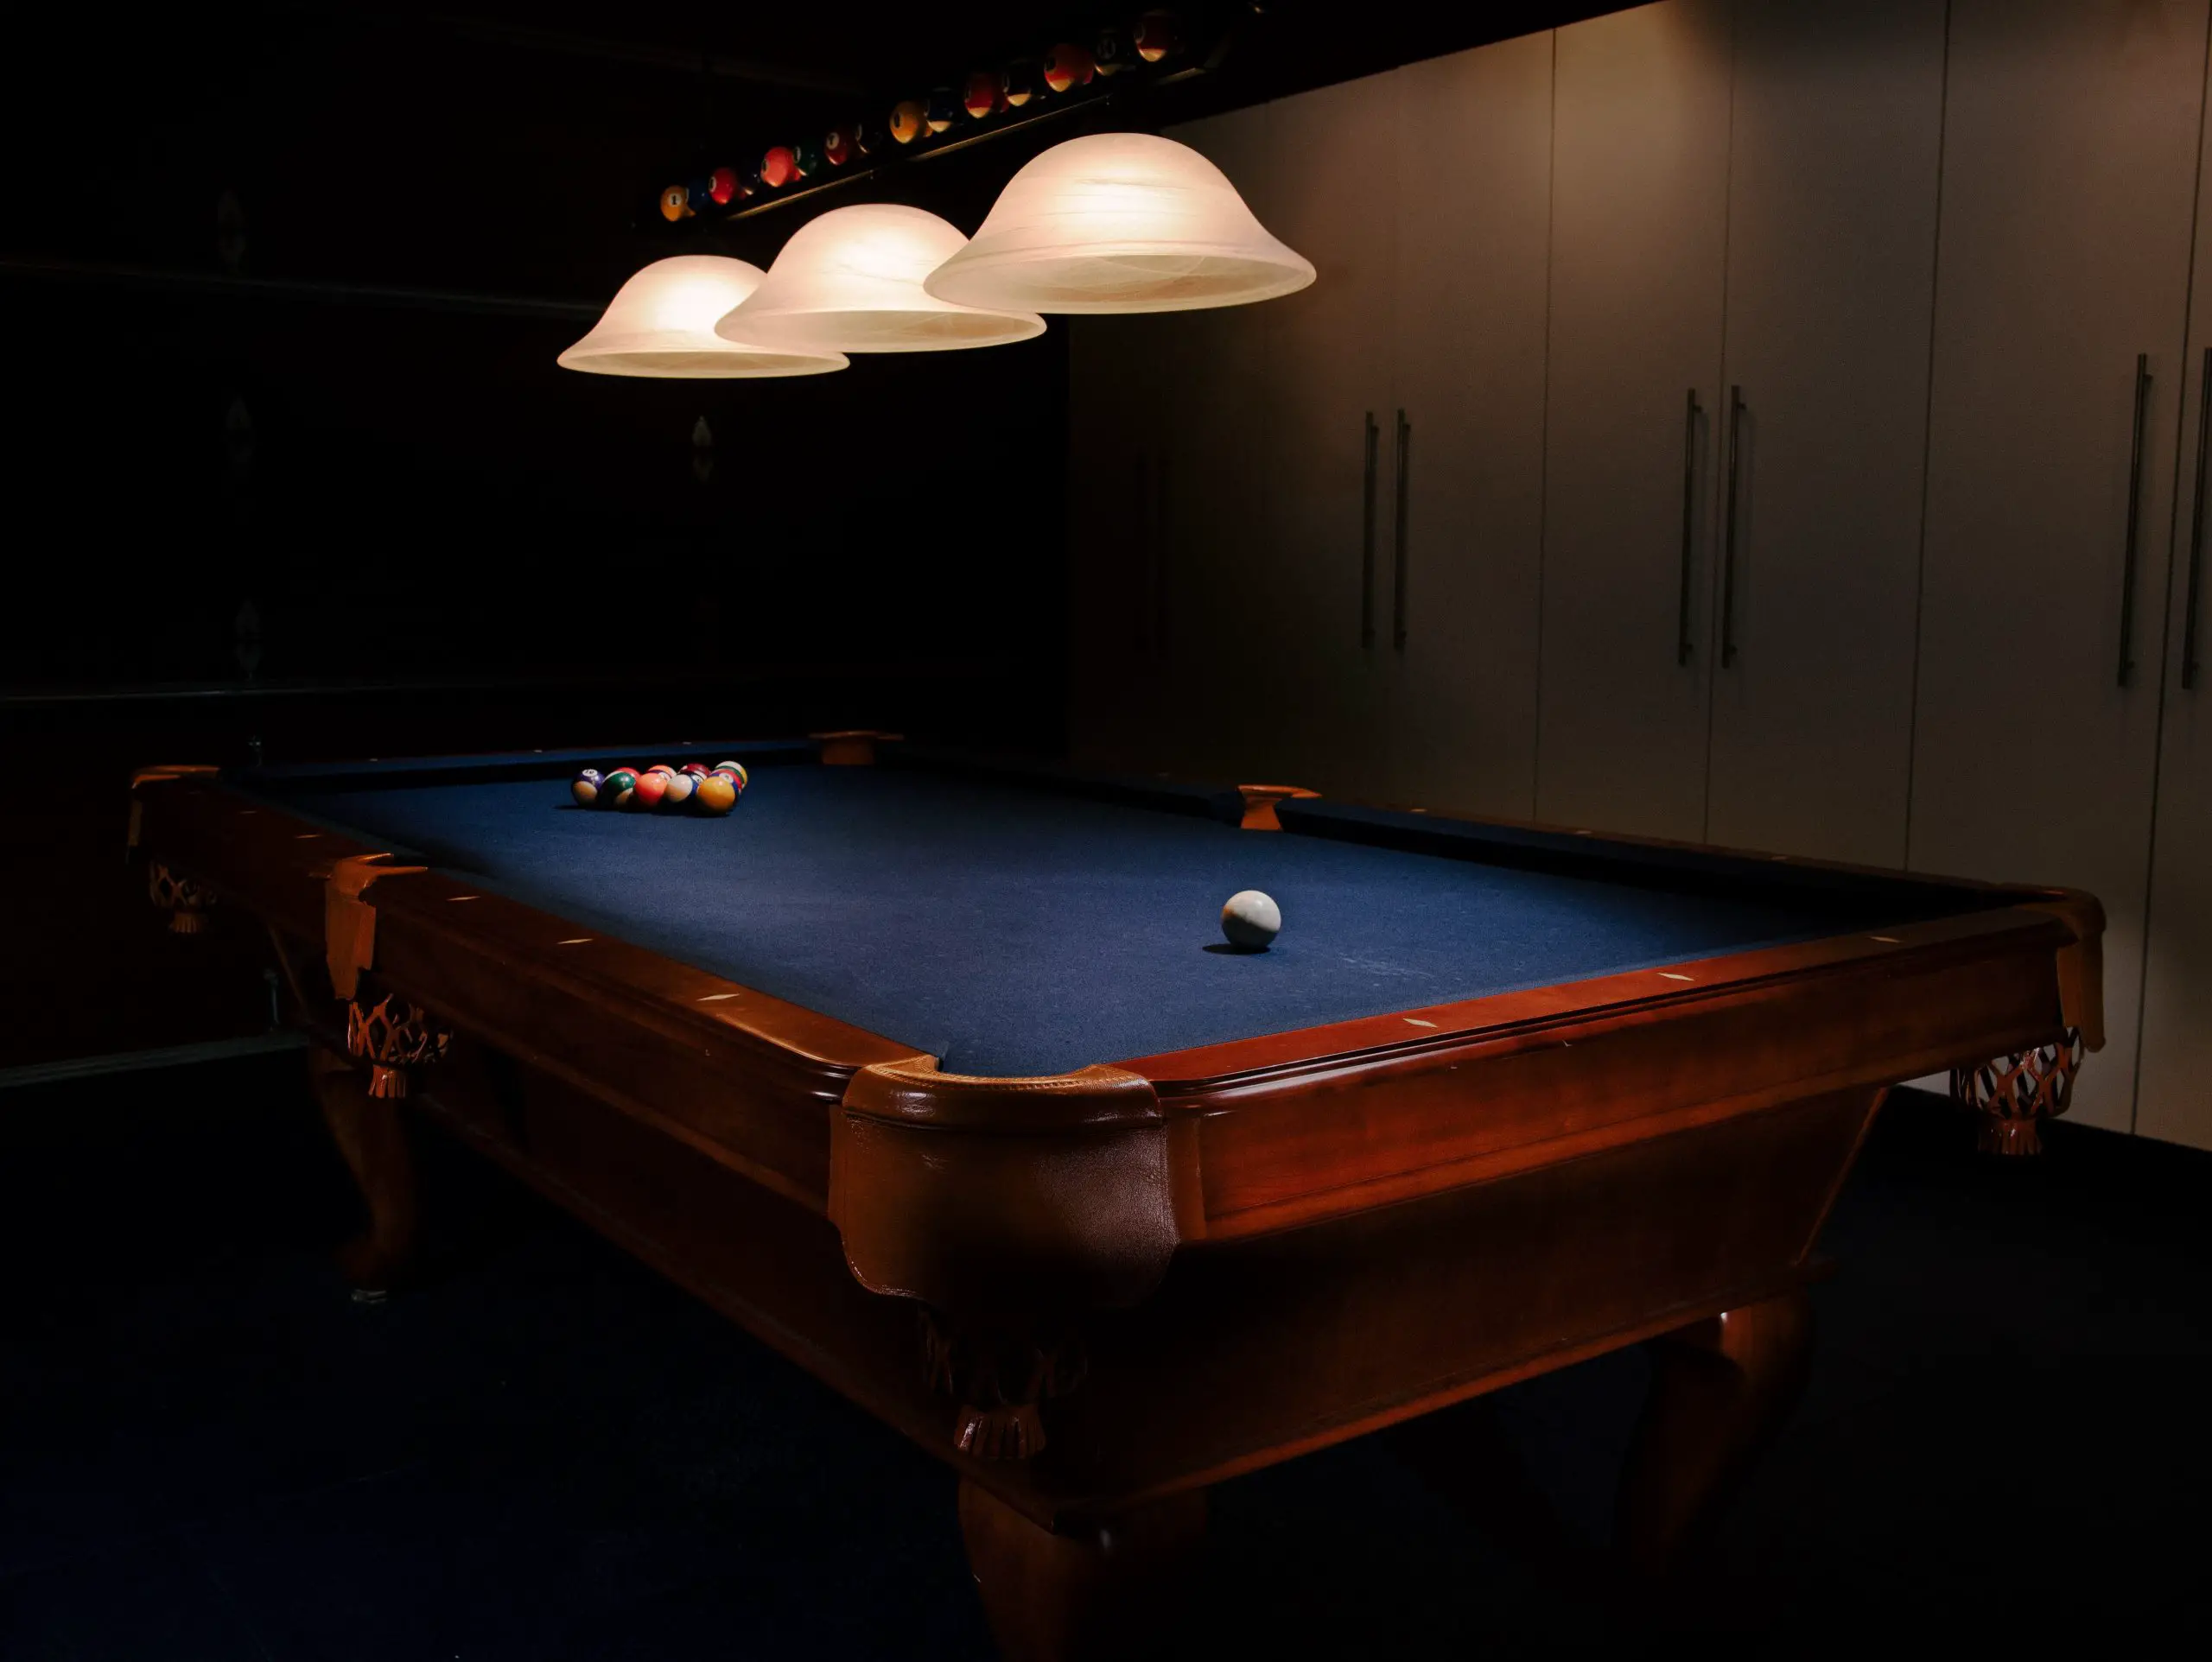 How To Measure A Pool Table?